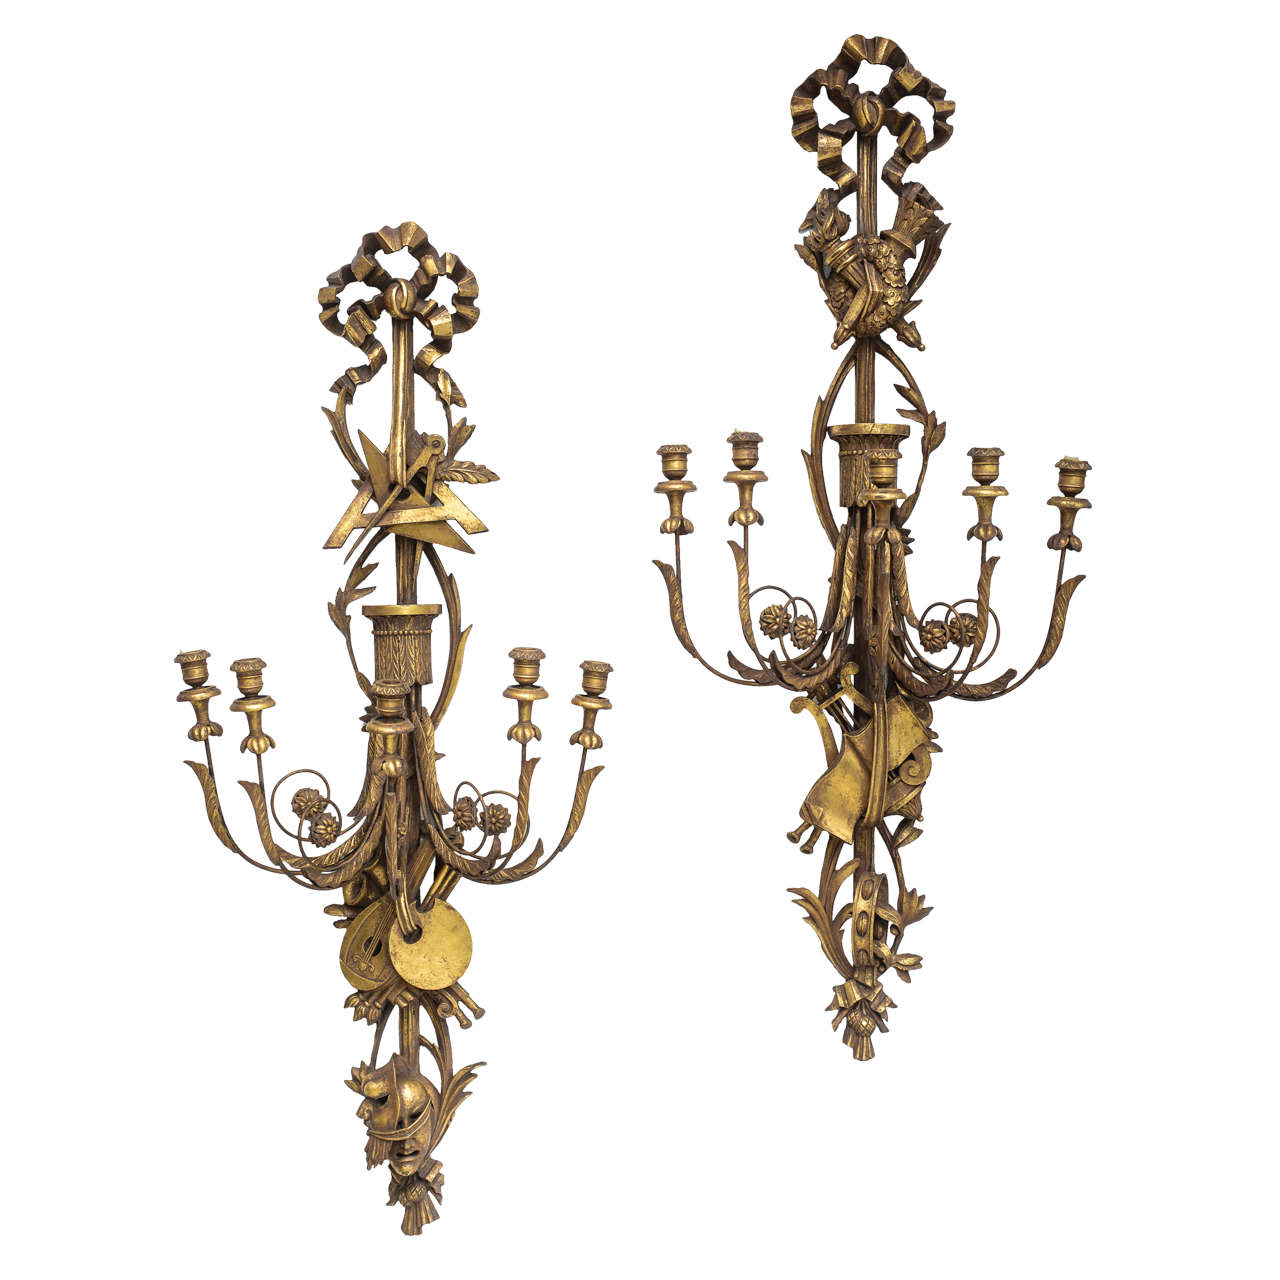 Spectacular Pair of Oversized Giltwood Sconces Ornately Carved with the Arts